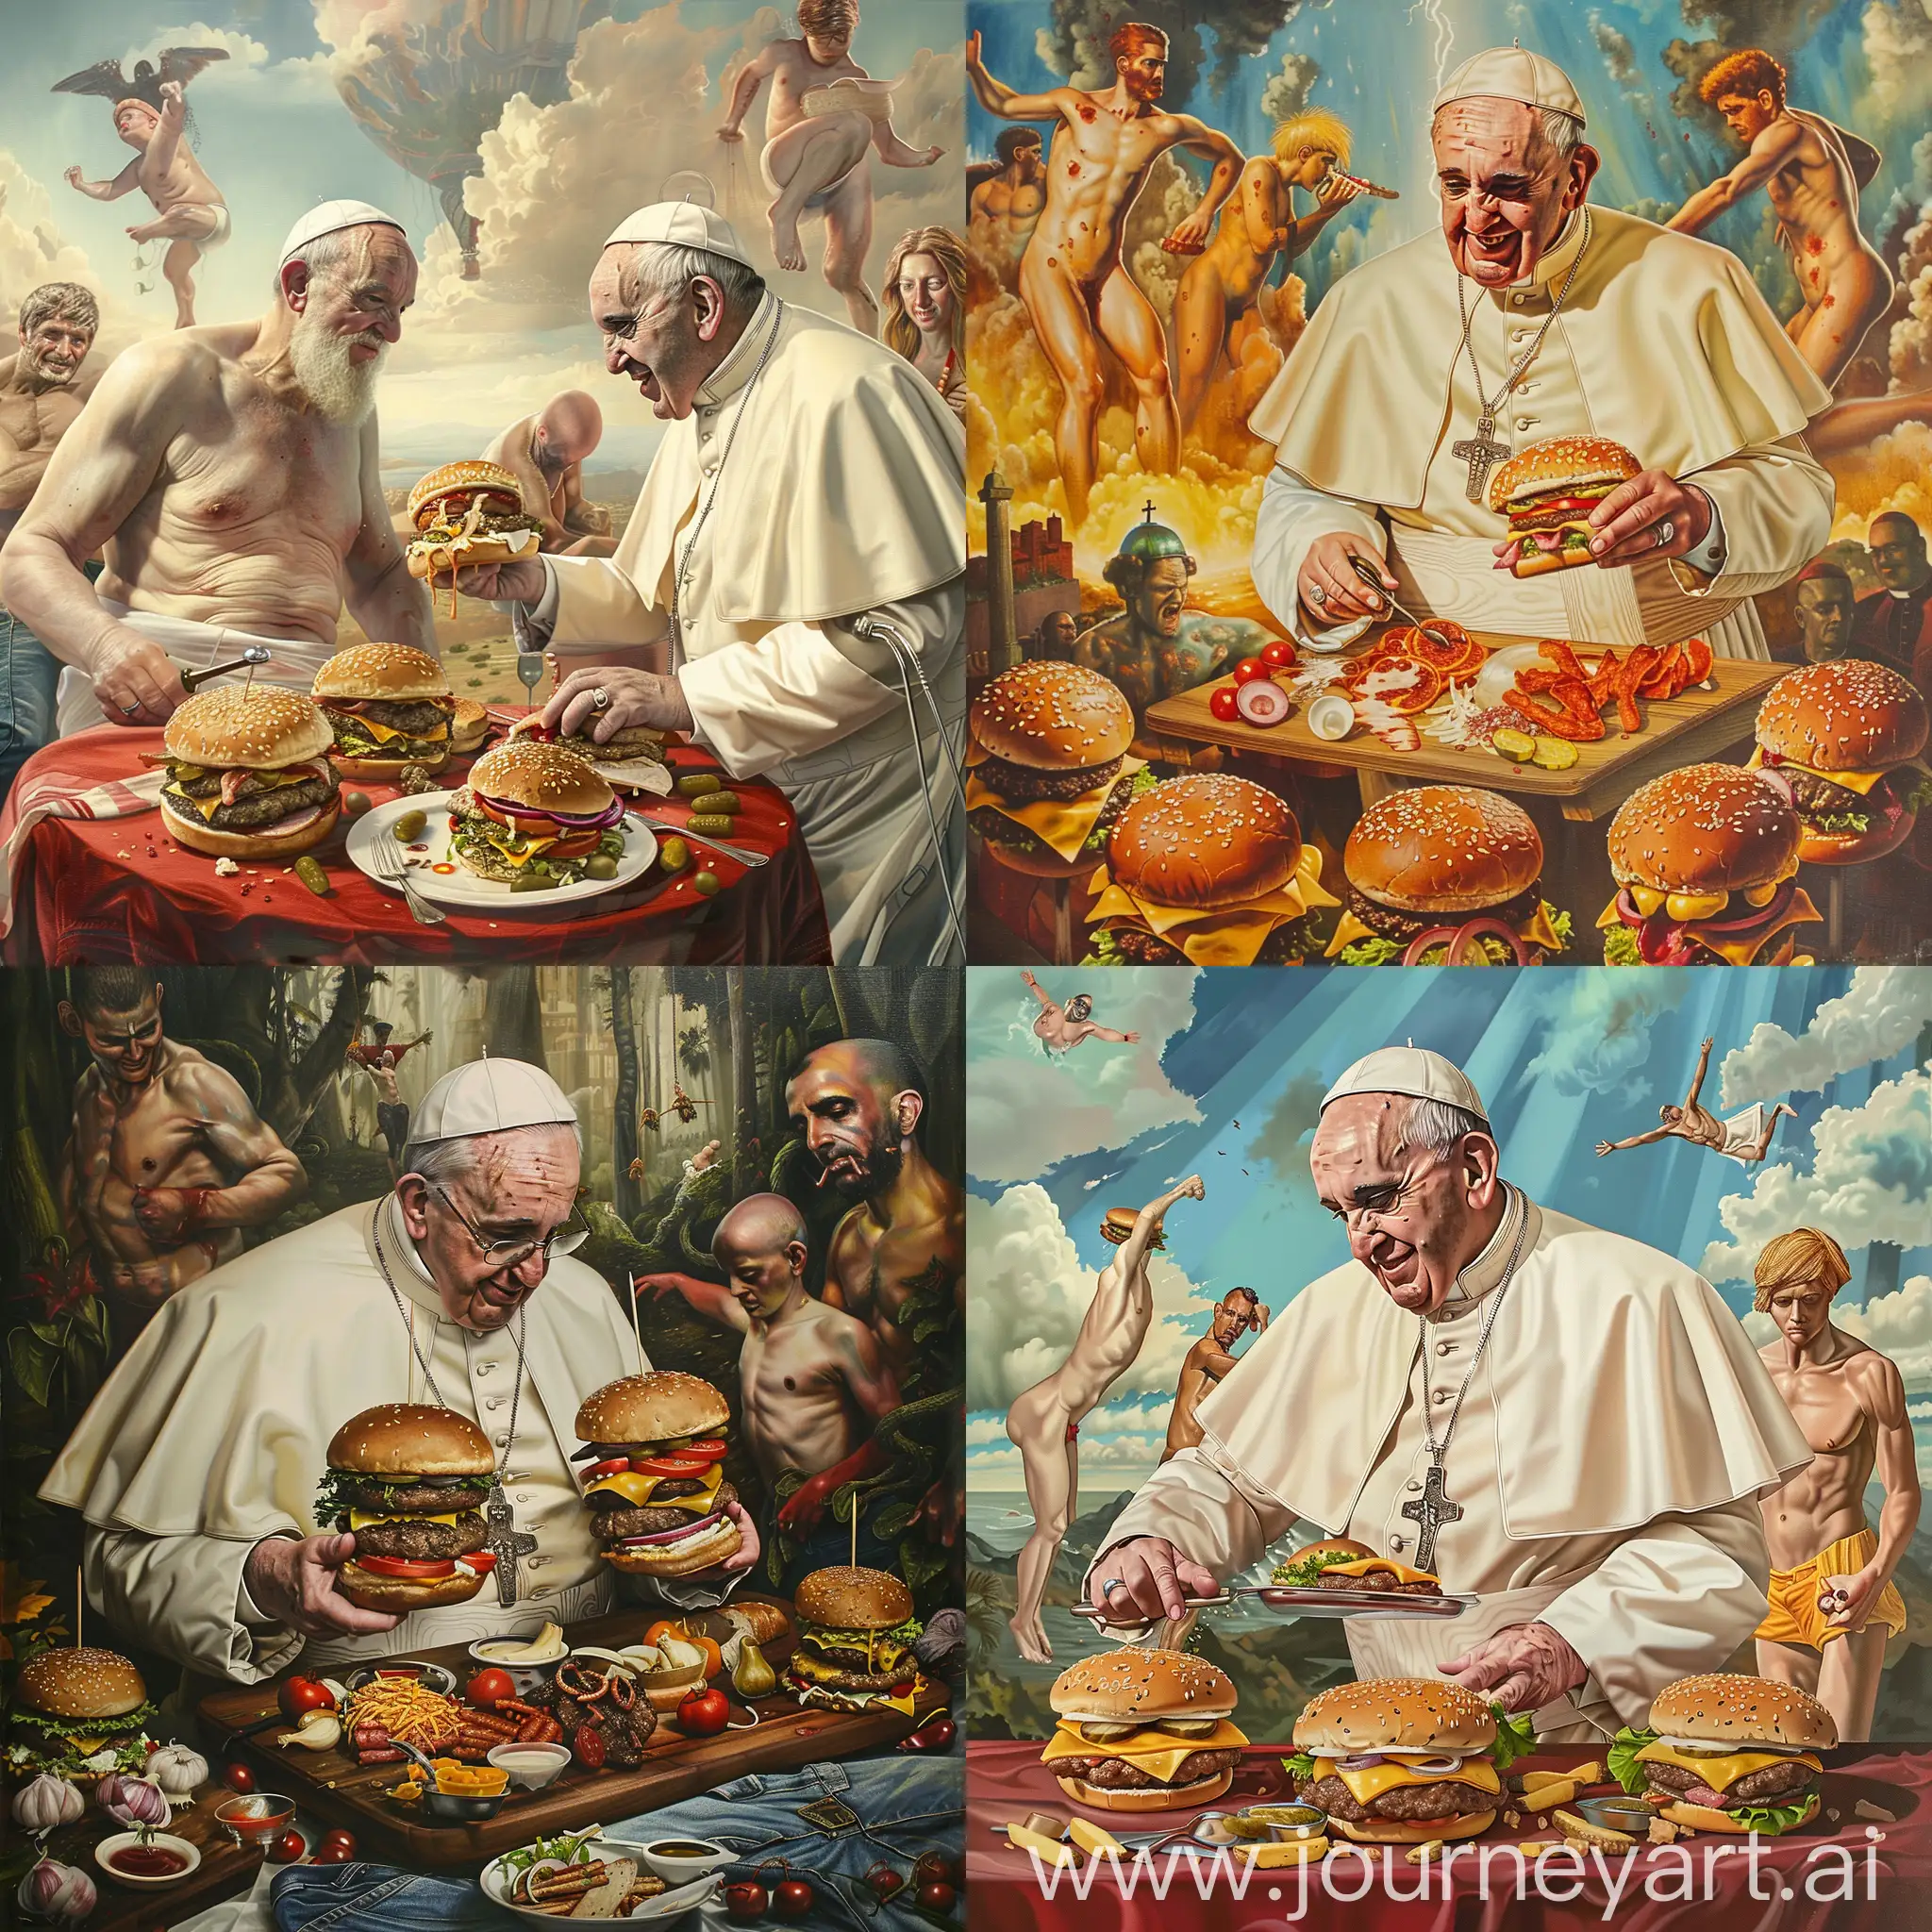 Roman-Pope-Making-Burgers-with-Deities-in-Jeans-in-Paradise